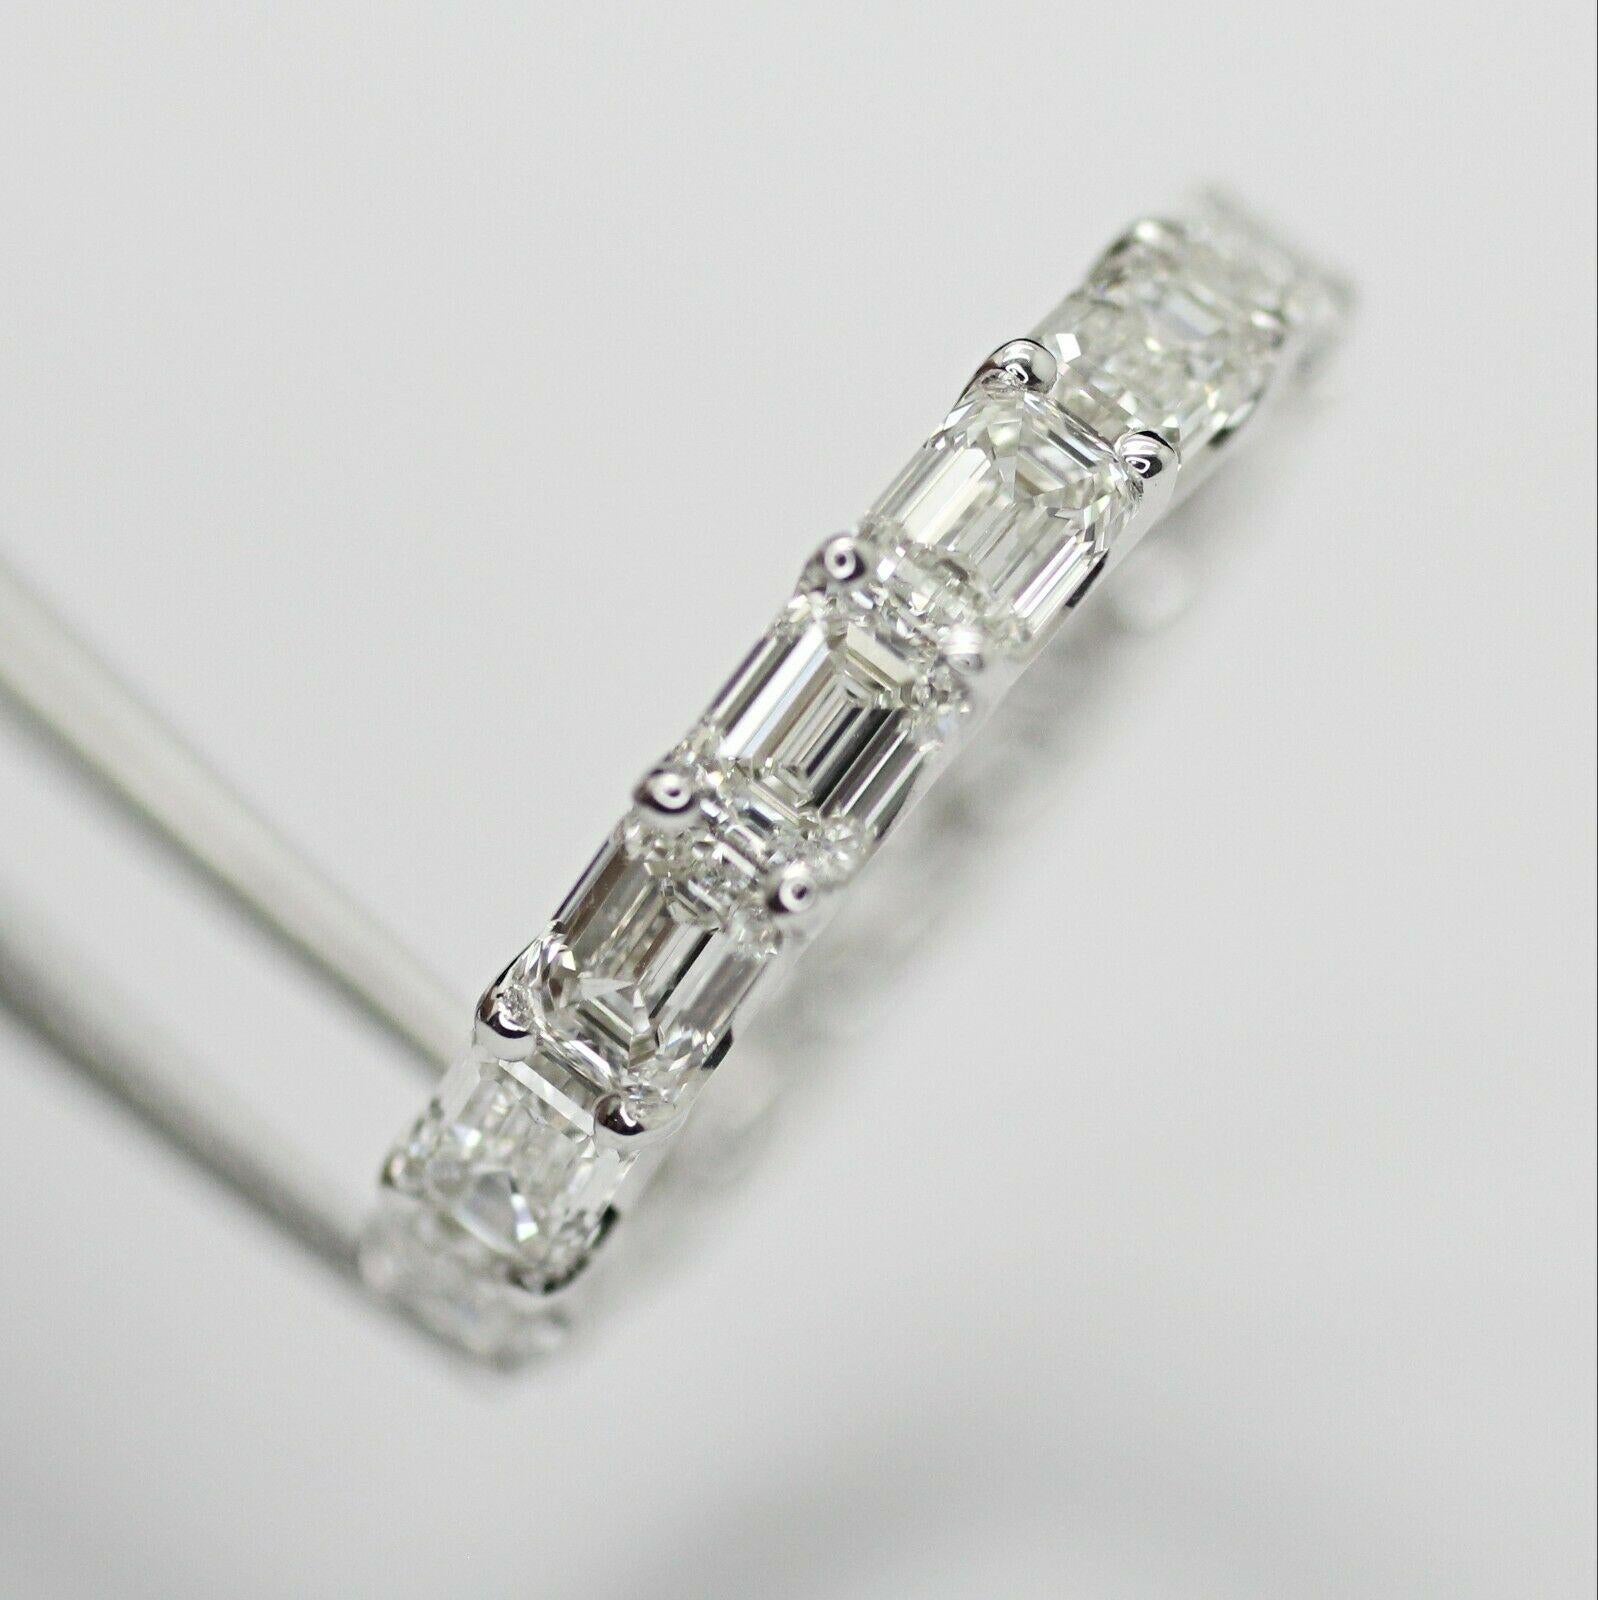  Specifications:
    main stone:GIA CERTIFIED  EMERALD CUT DIAMOND
    DIAMONDS: 15 PCS
    carat total weight: 4.56 CARAT TOTAL WEIGHT
    color: I
    clarity: VVS1-VS1    brand: NONE
    metal: 18K WHITE GOLD
    type: ETERNITY ring
    weight: 